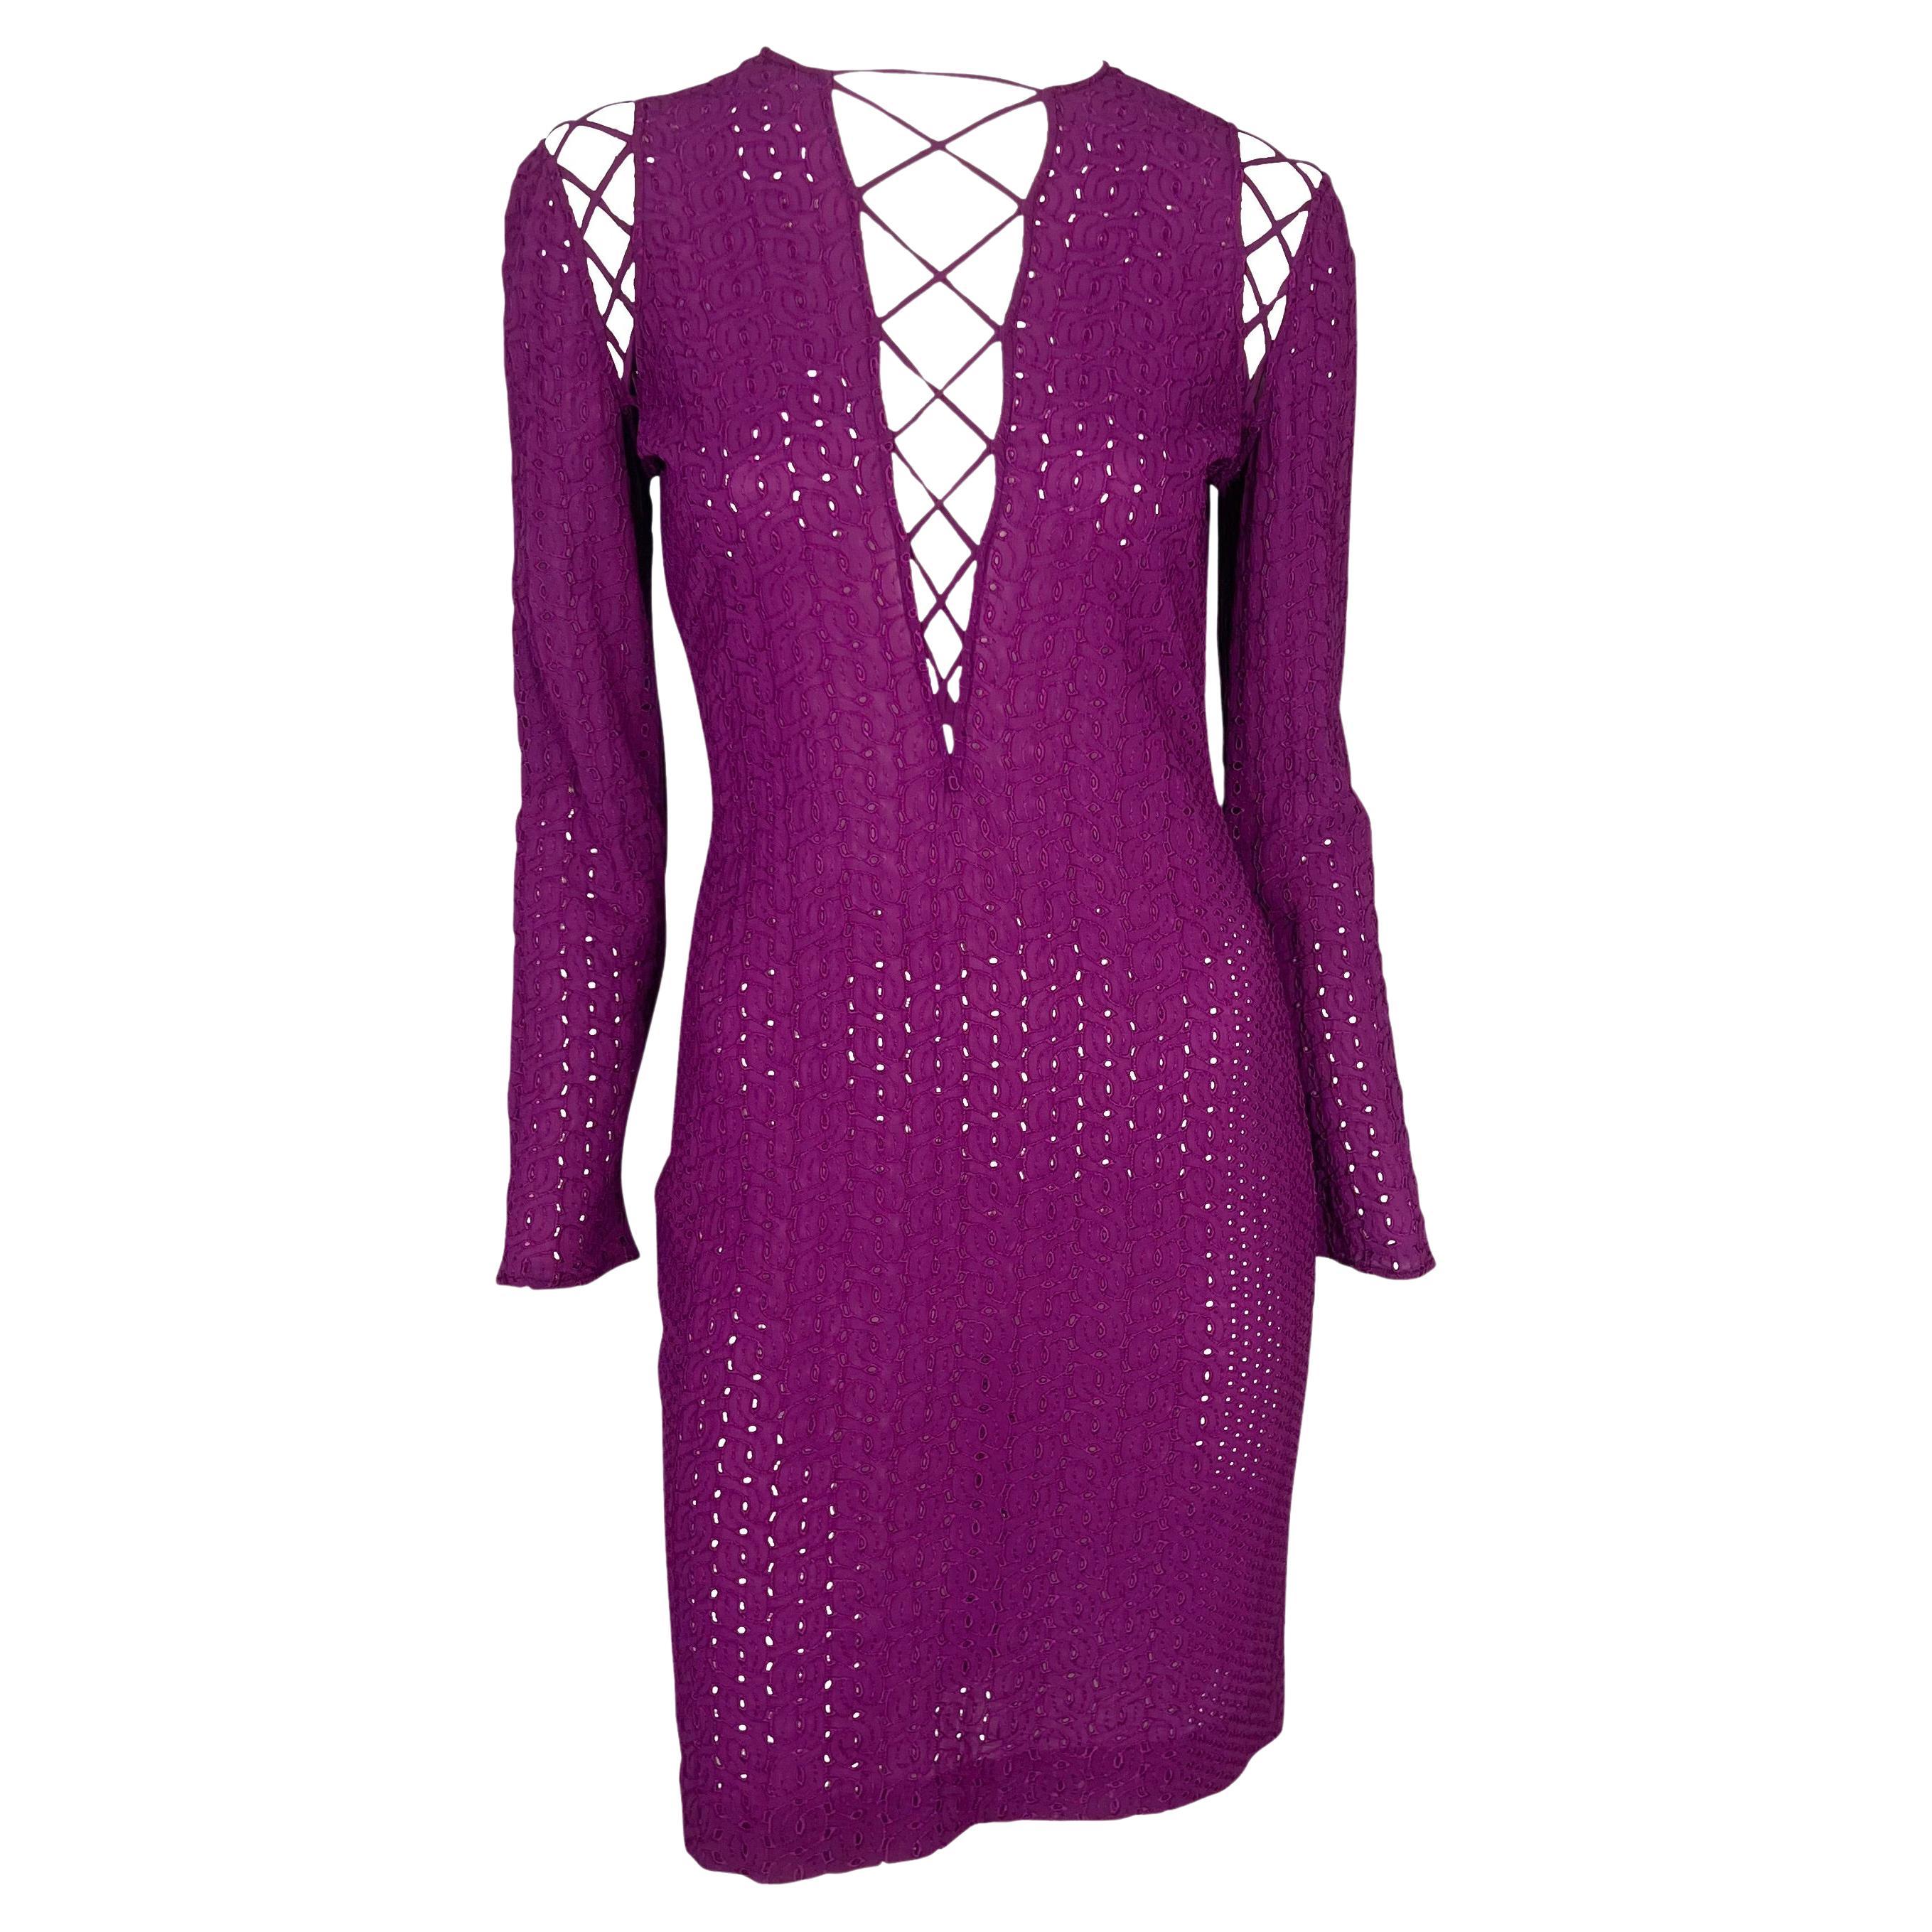 S/S 2002 Gianni Versace by Donatella Runway Purple Lace-Up Eyelet Dress For Sale